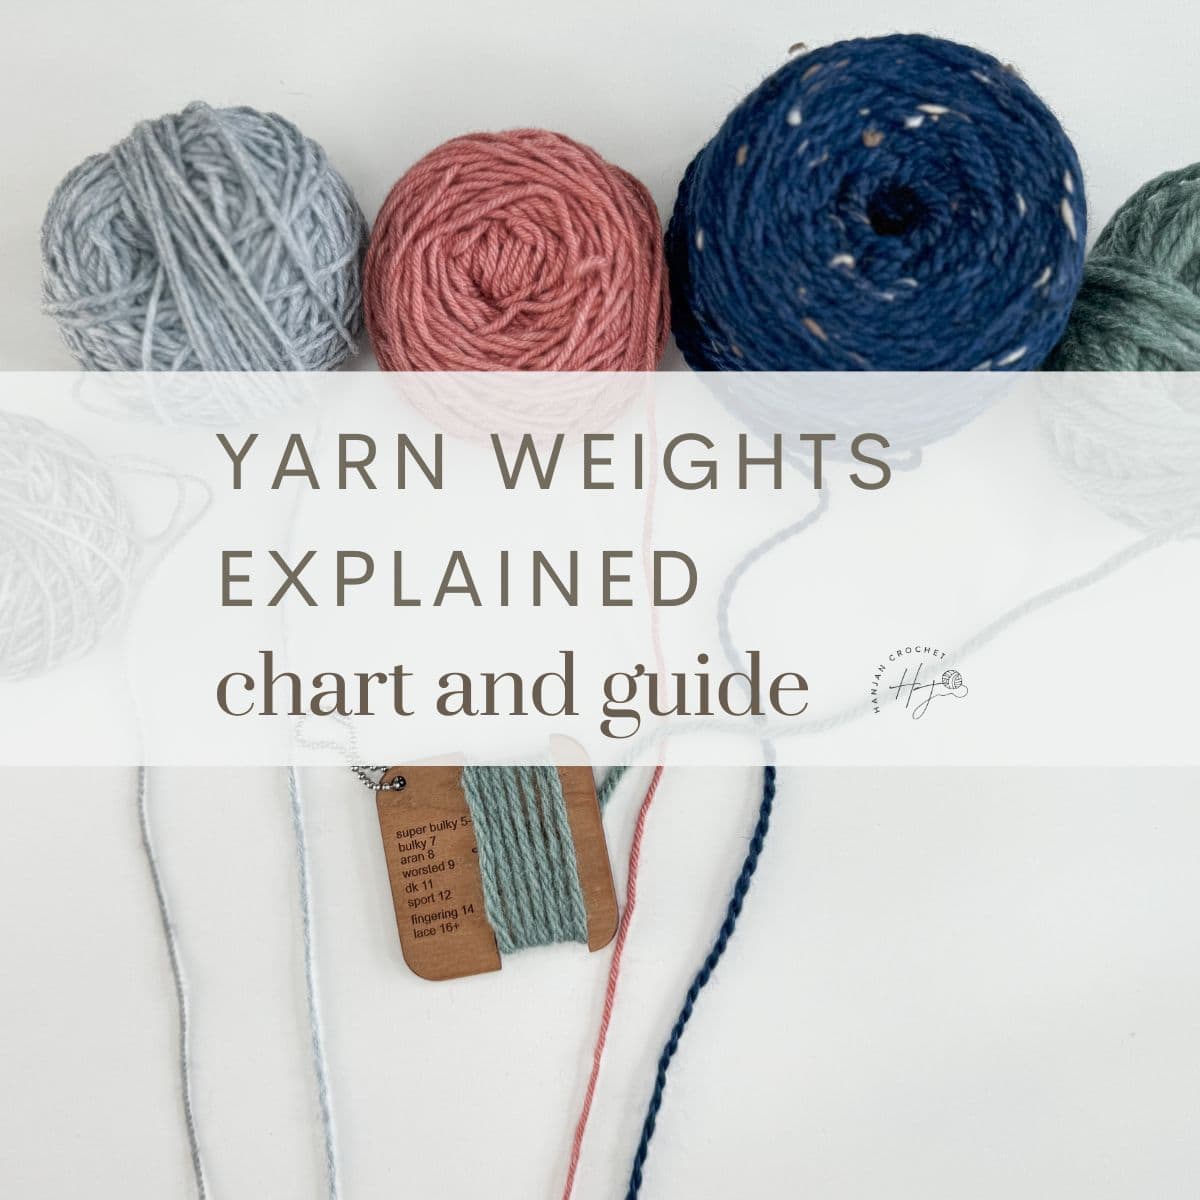 Five balls of yarn in different colors and thicknesses are displayed above the text "Yarn Weights Explained: Chart and Guide". Four samples of yarn run through a tag showing various thicknesses, perfectly illustrating the yarn weight chart.